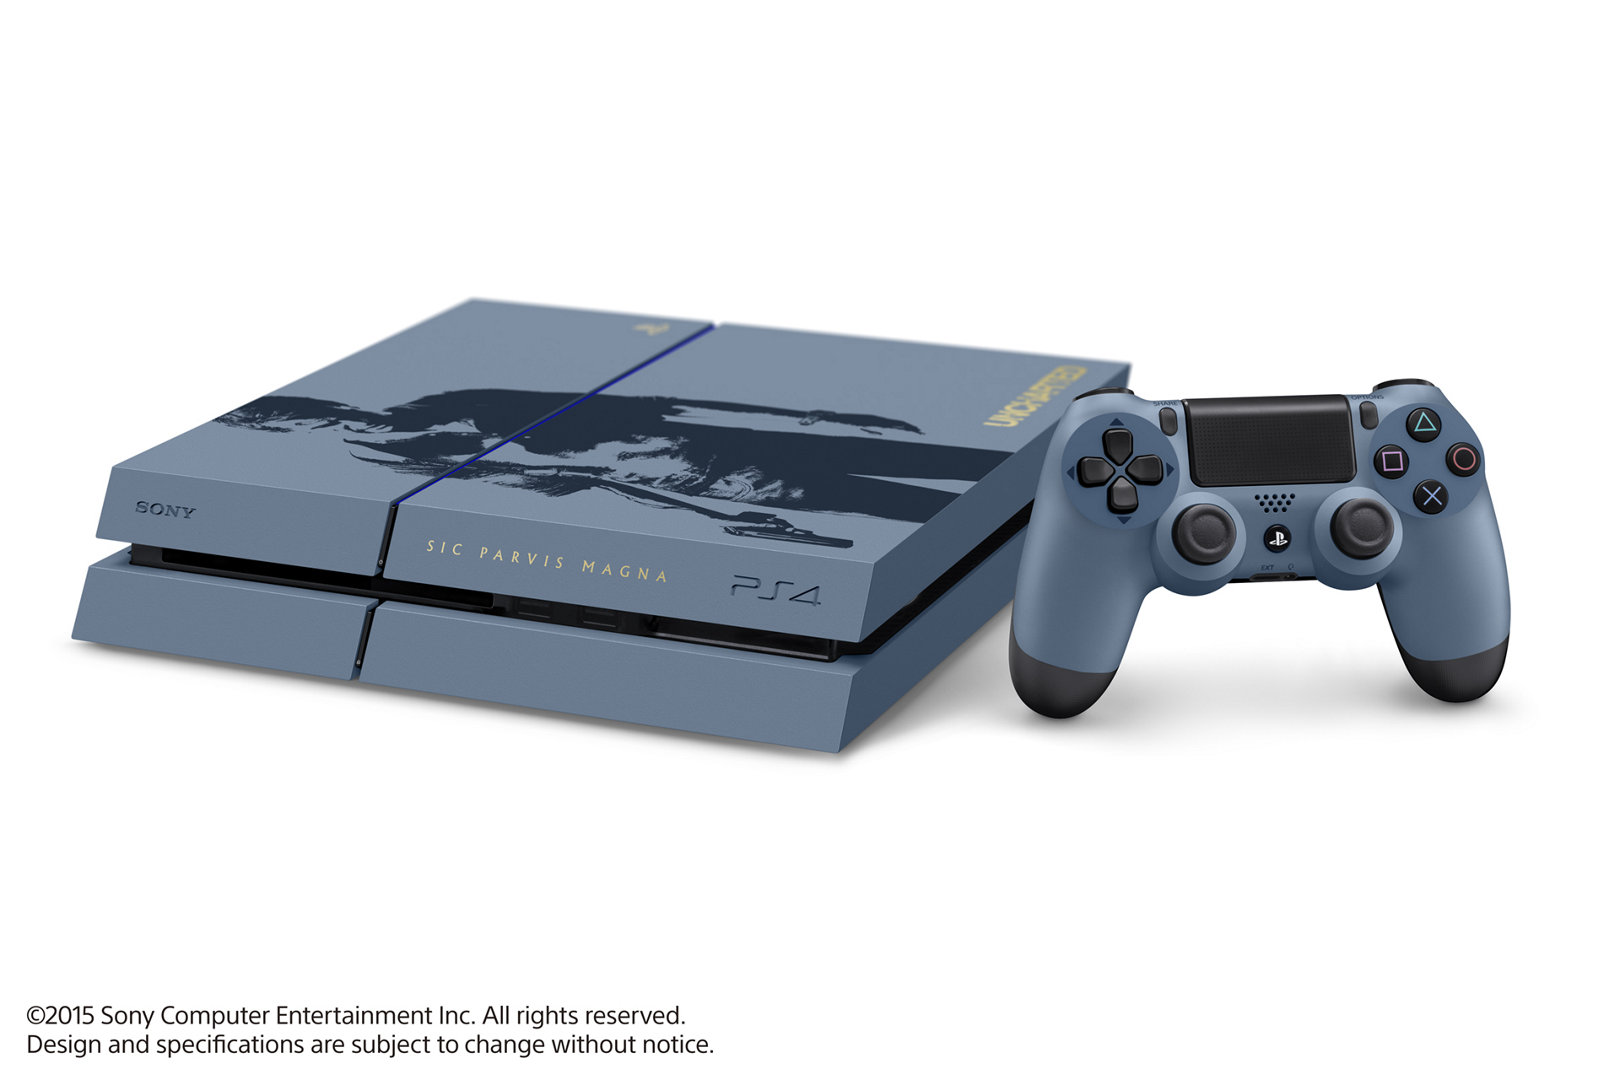 Limited Edition Uncharted 4 PS4 Bundle Launches April